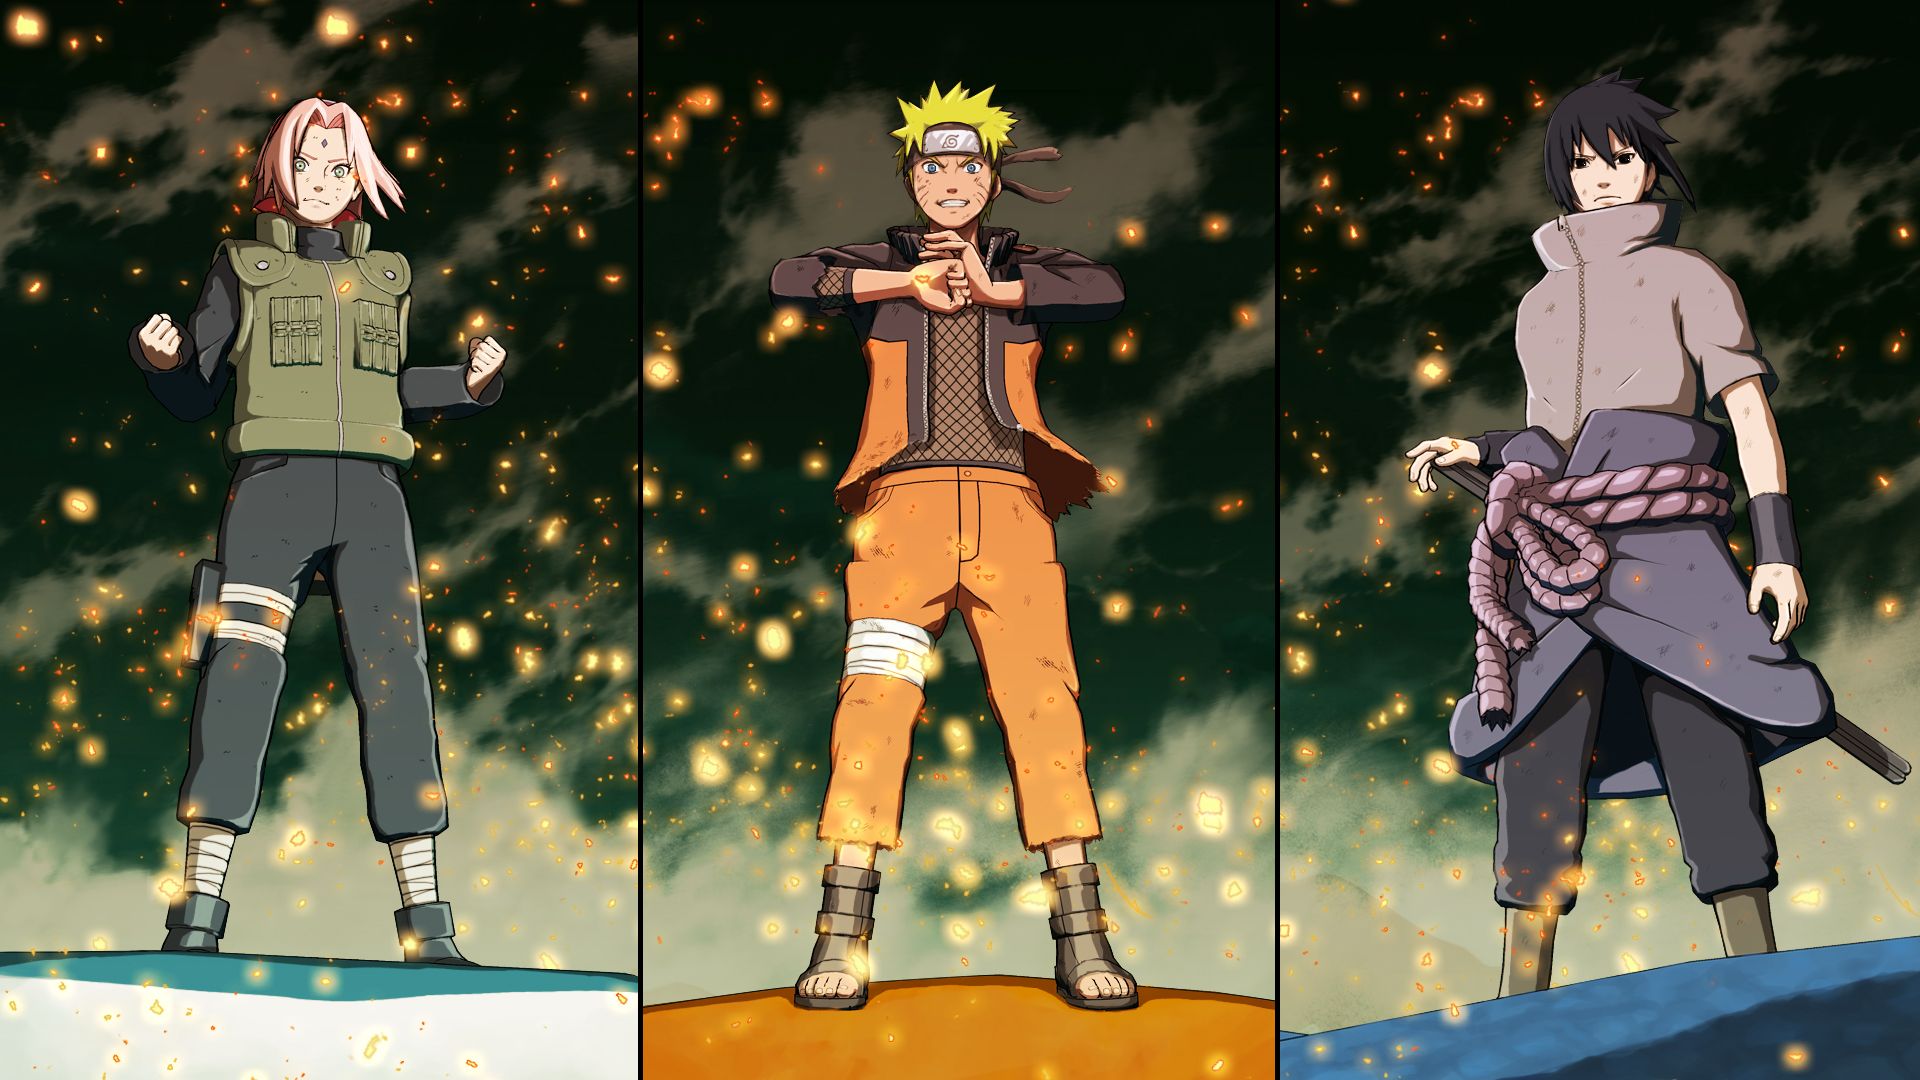 Concept art for Naruto Ninja Storm 4 shows Team 7's Sakura, Naruto, and Sasuke preparing for battle as they stand on each of their summoned creatures.